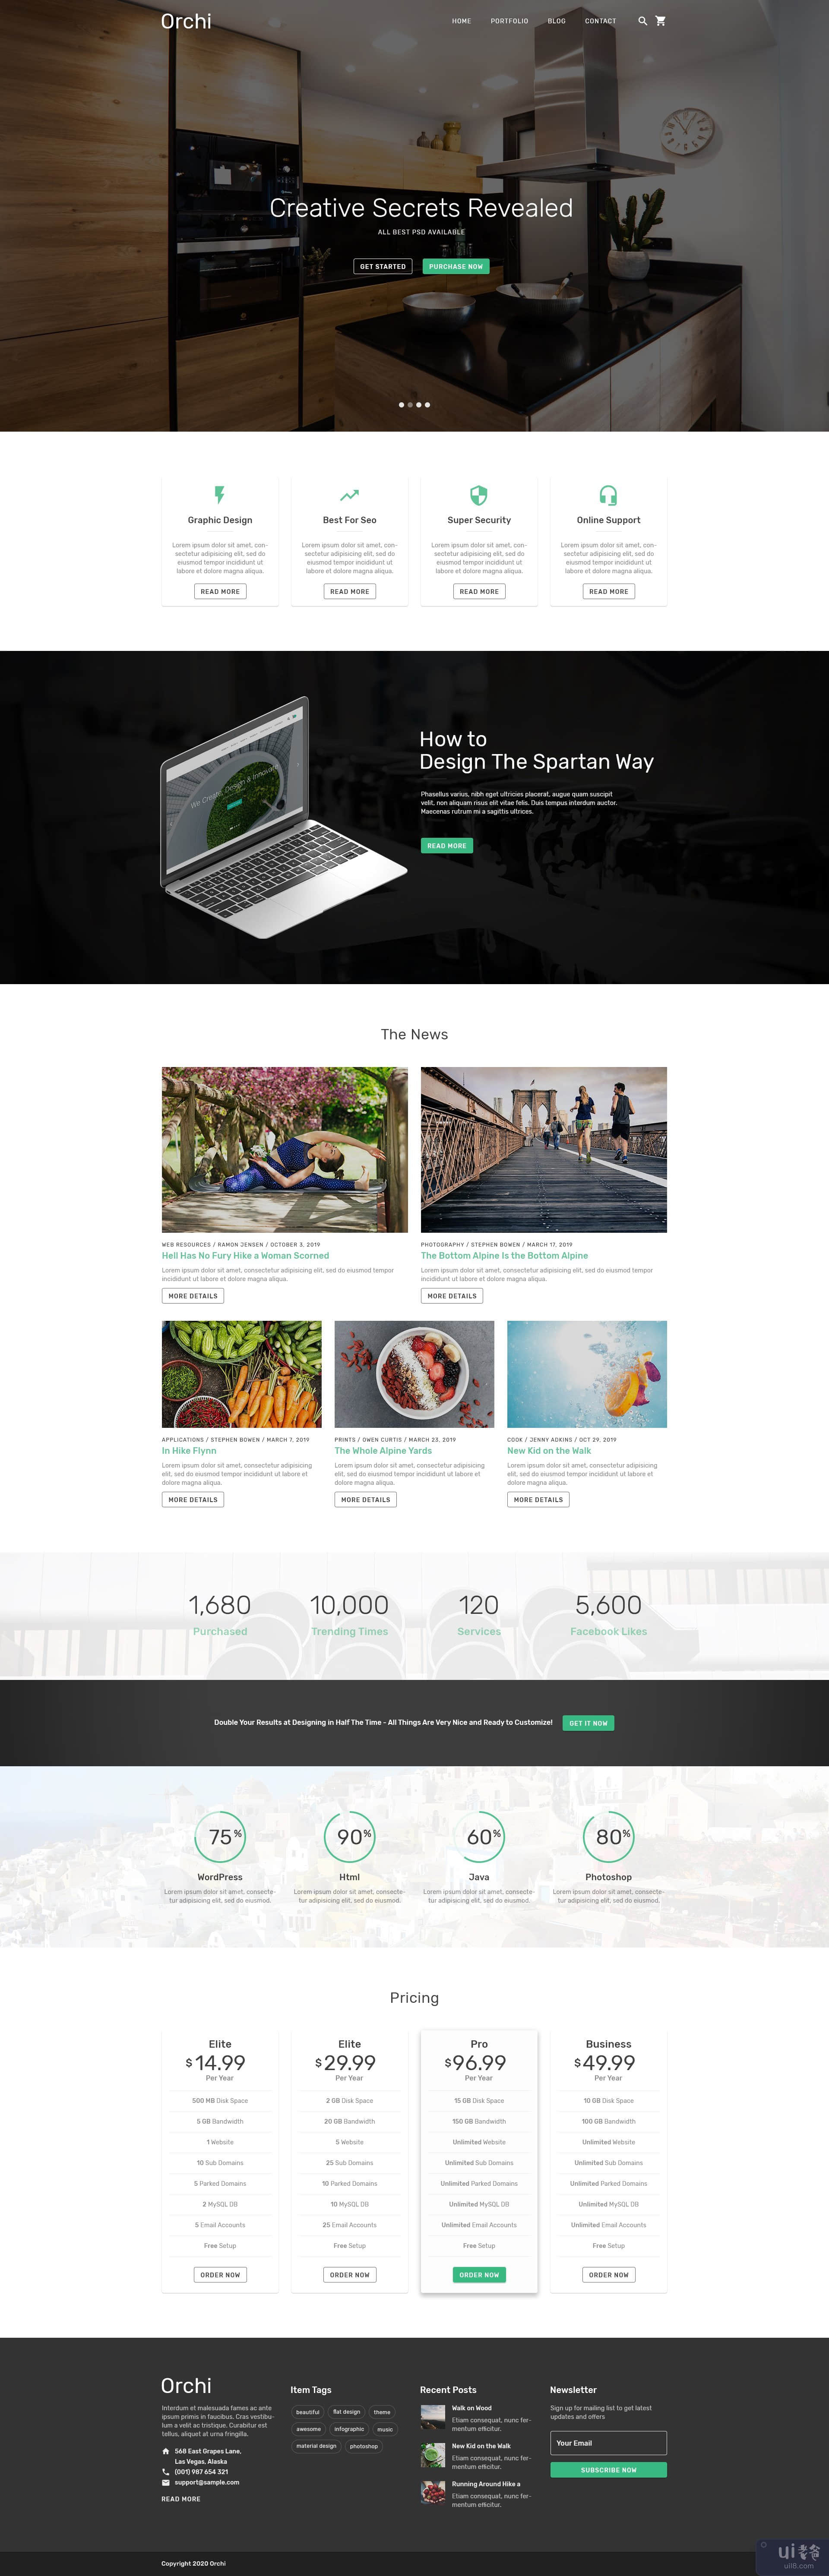 Orchi 商业主页 PSD Web 模板(Orchi Business Homepage PSD Web Template)插图